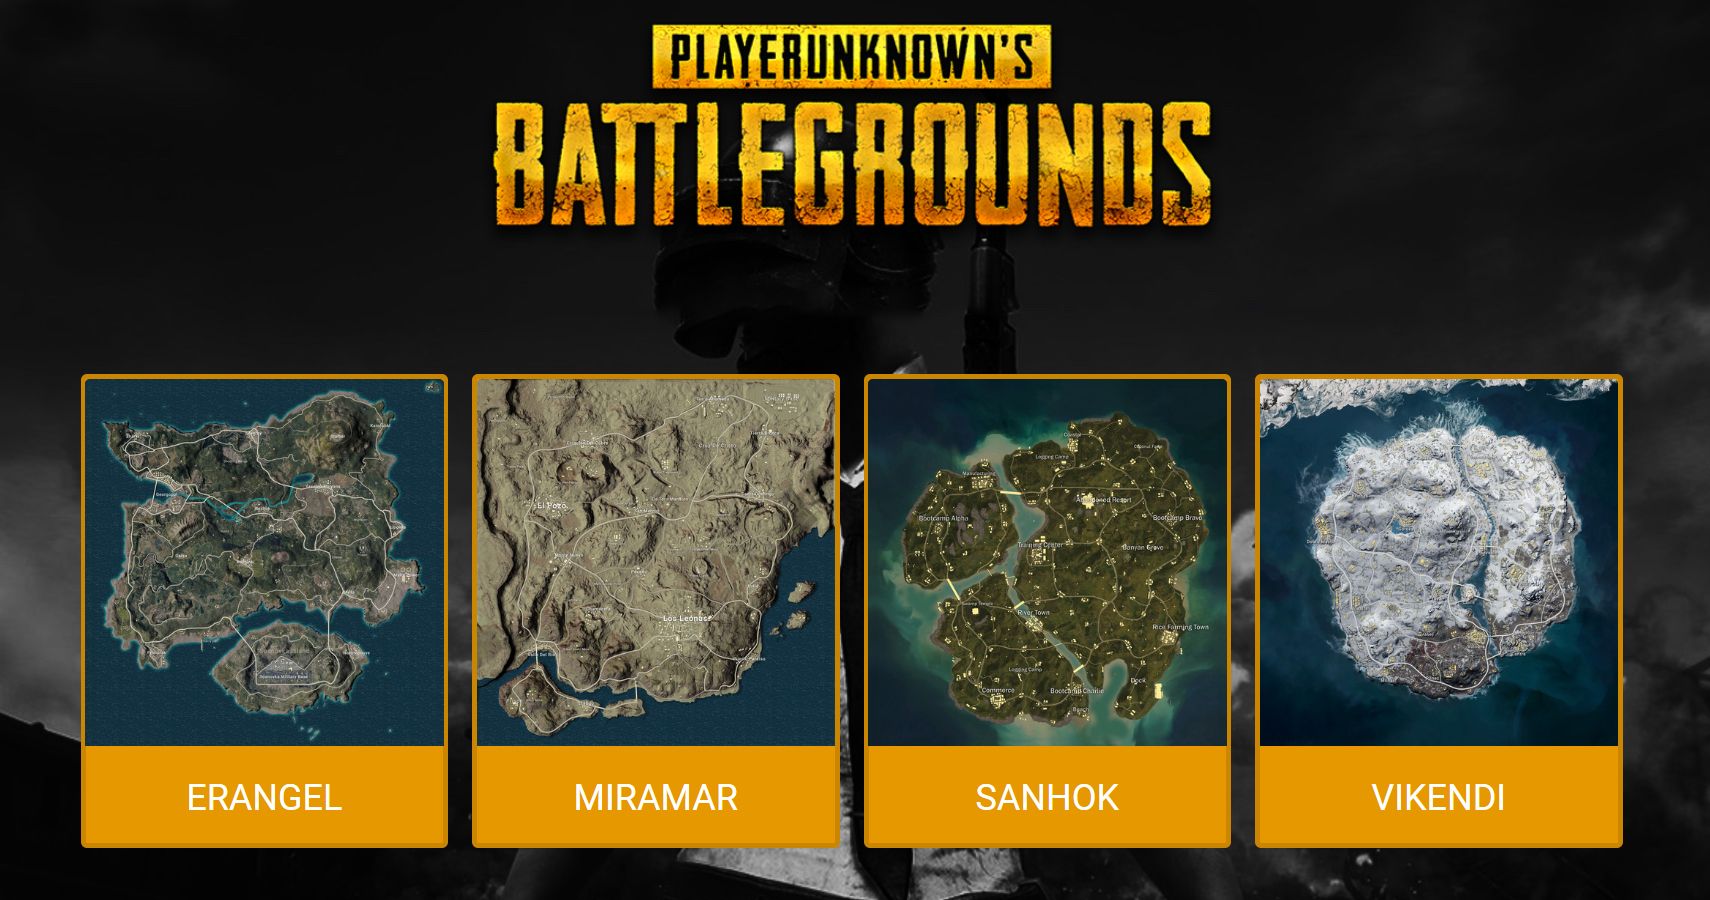 pubg better than fortnite: Every Map In The Game, Ranked From Worst To Best